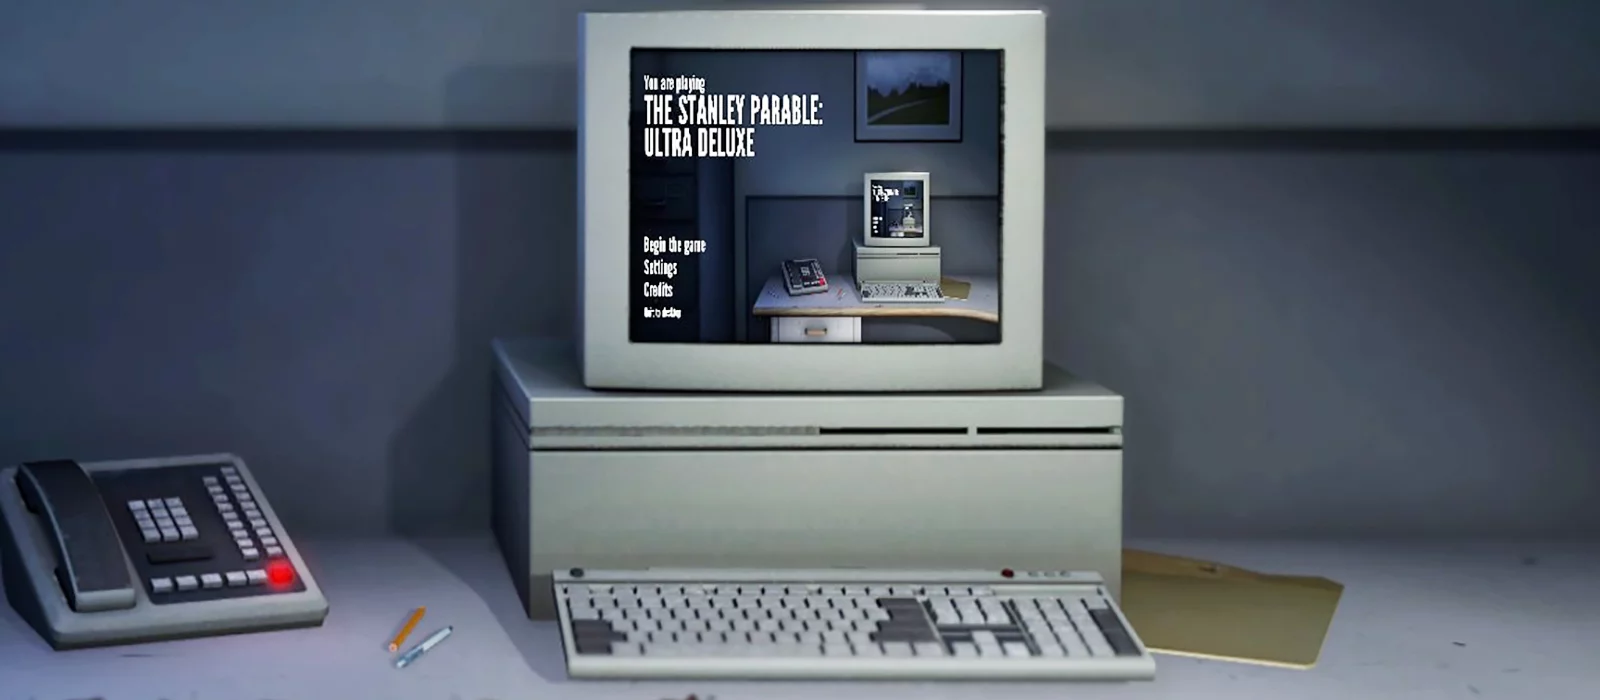 Stanley parable ultra. Ultra Deluxe Stanley. The Stanley Parable: Ultra Deluxe. The Stanley Parable Ultra Deluxe русская озвучка. The Stanley Parable Ultra Deluxe логотип.